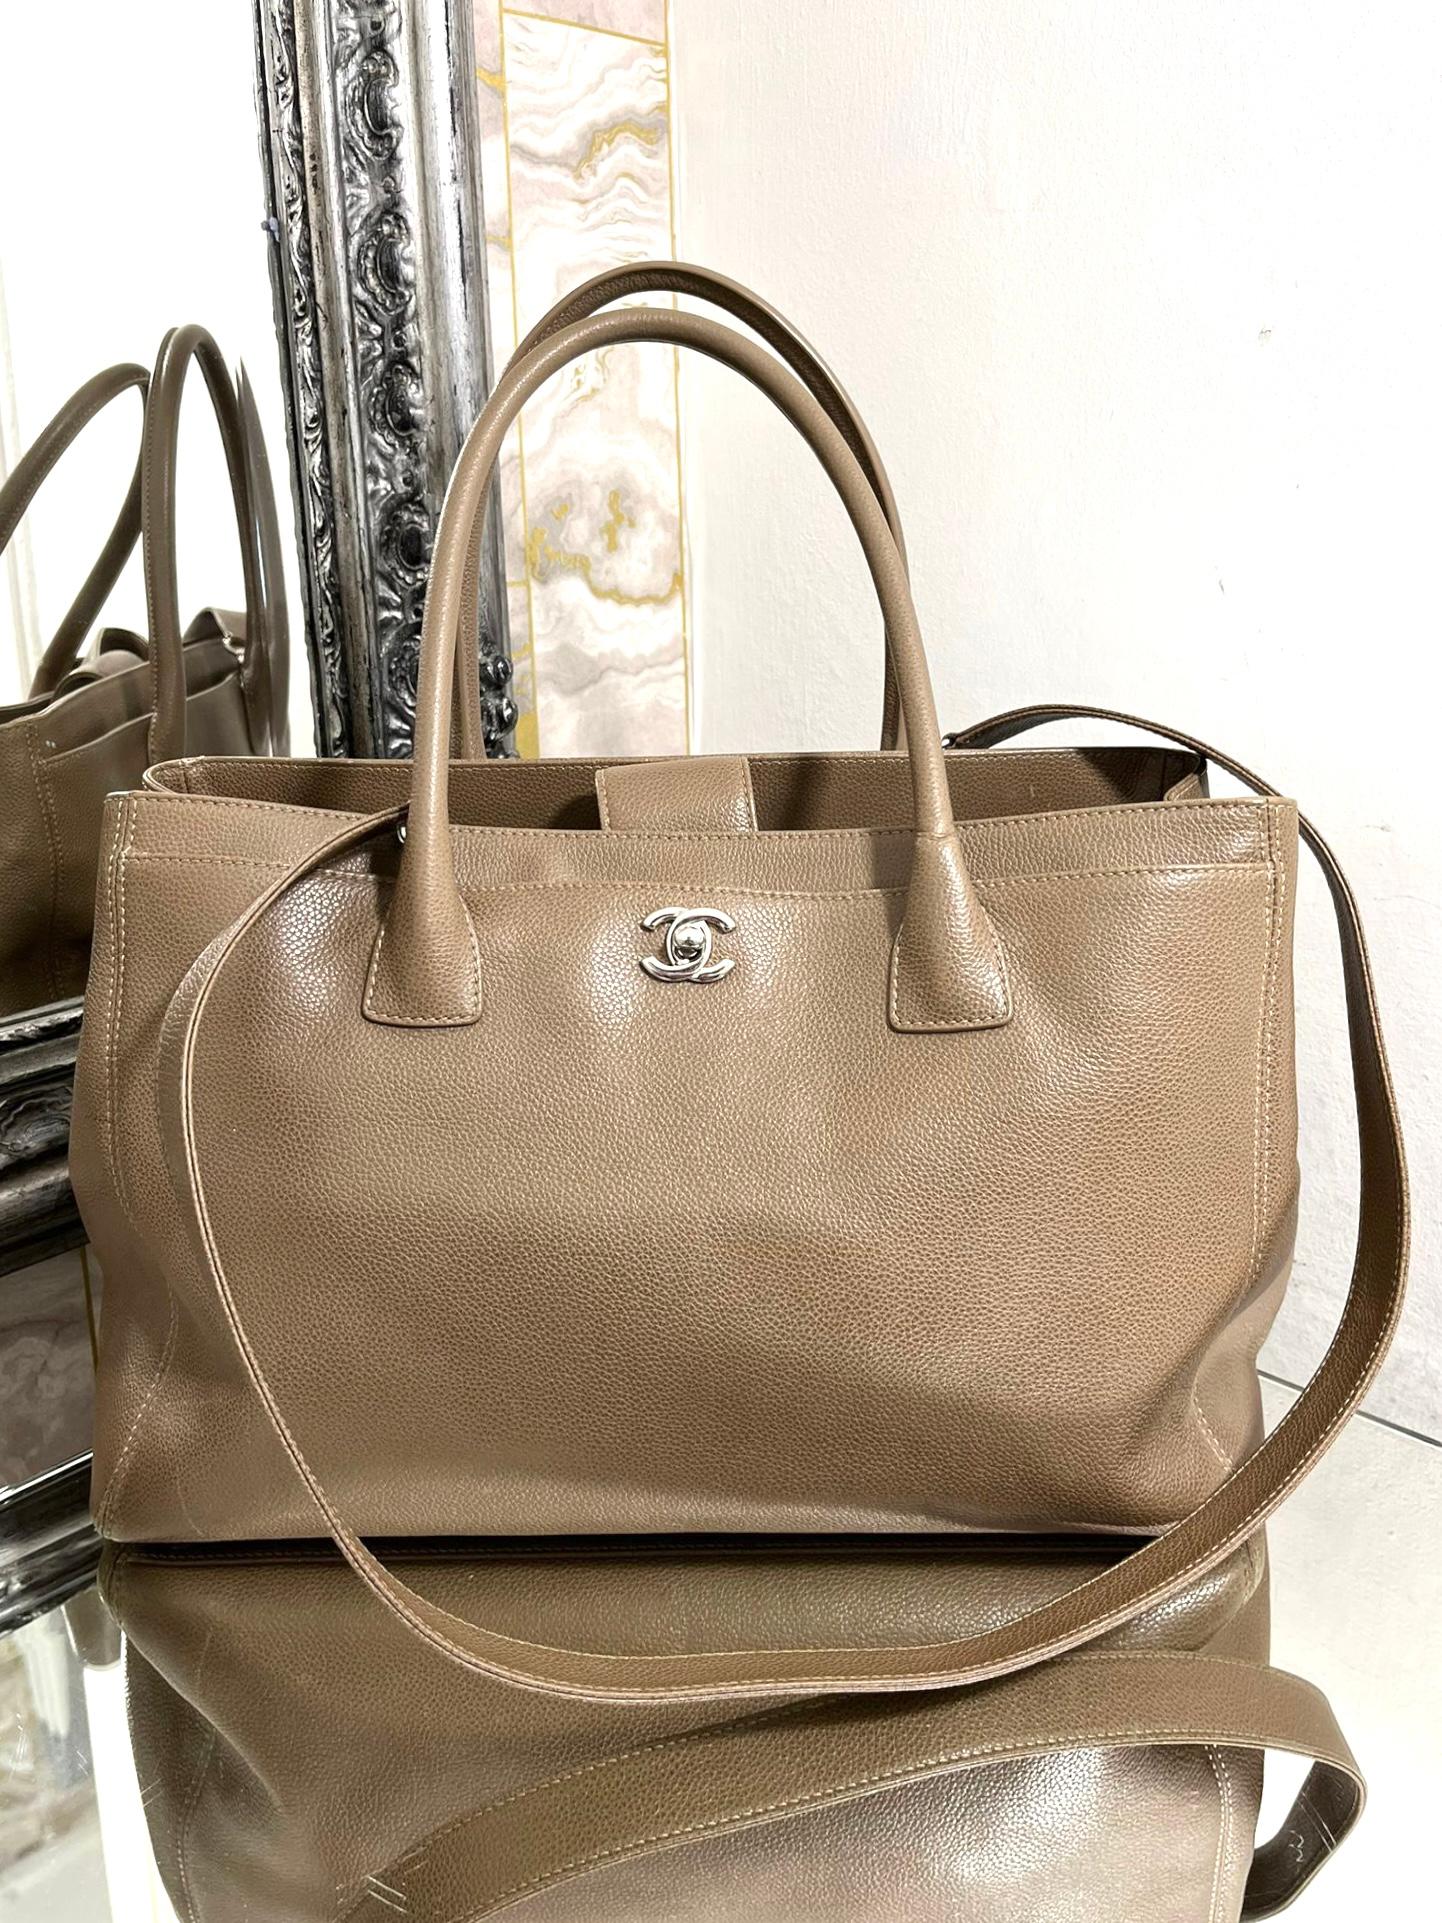 Chanel Leather Cerf  Tote Bag

Taupe, caviar pebbled leather bag with top carry handles and removable

shoulder strap. Silver hardware. 'CC' logo to front.

Size - Height 25cm, Width 35cm, Depth 12cm

Condition - Fair (Many marks, well leather